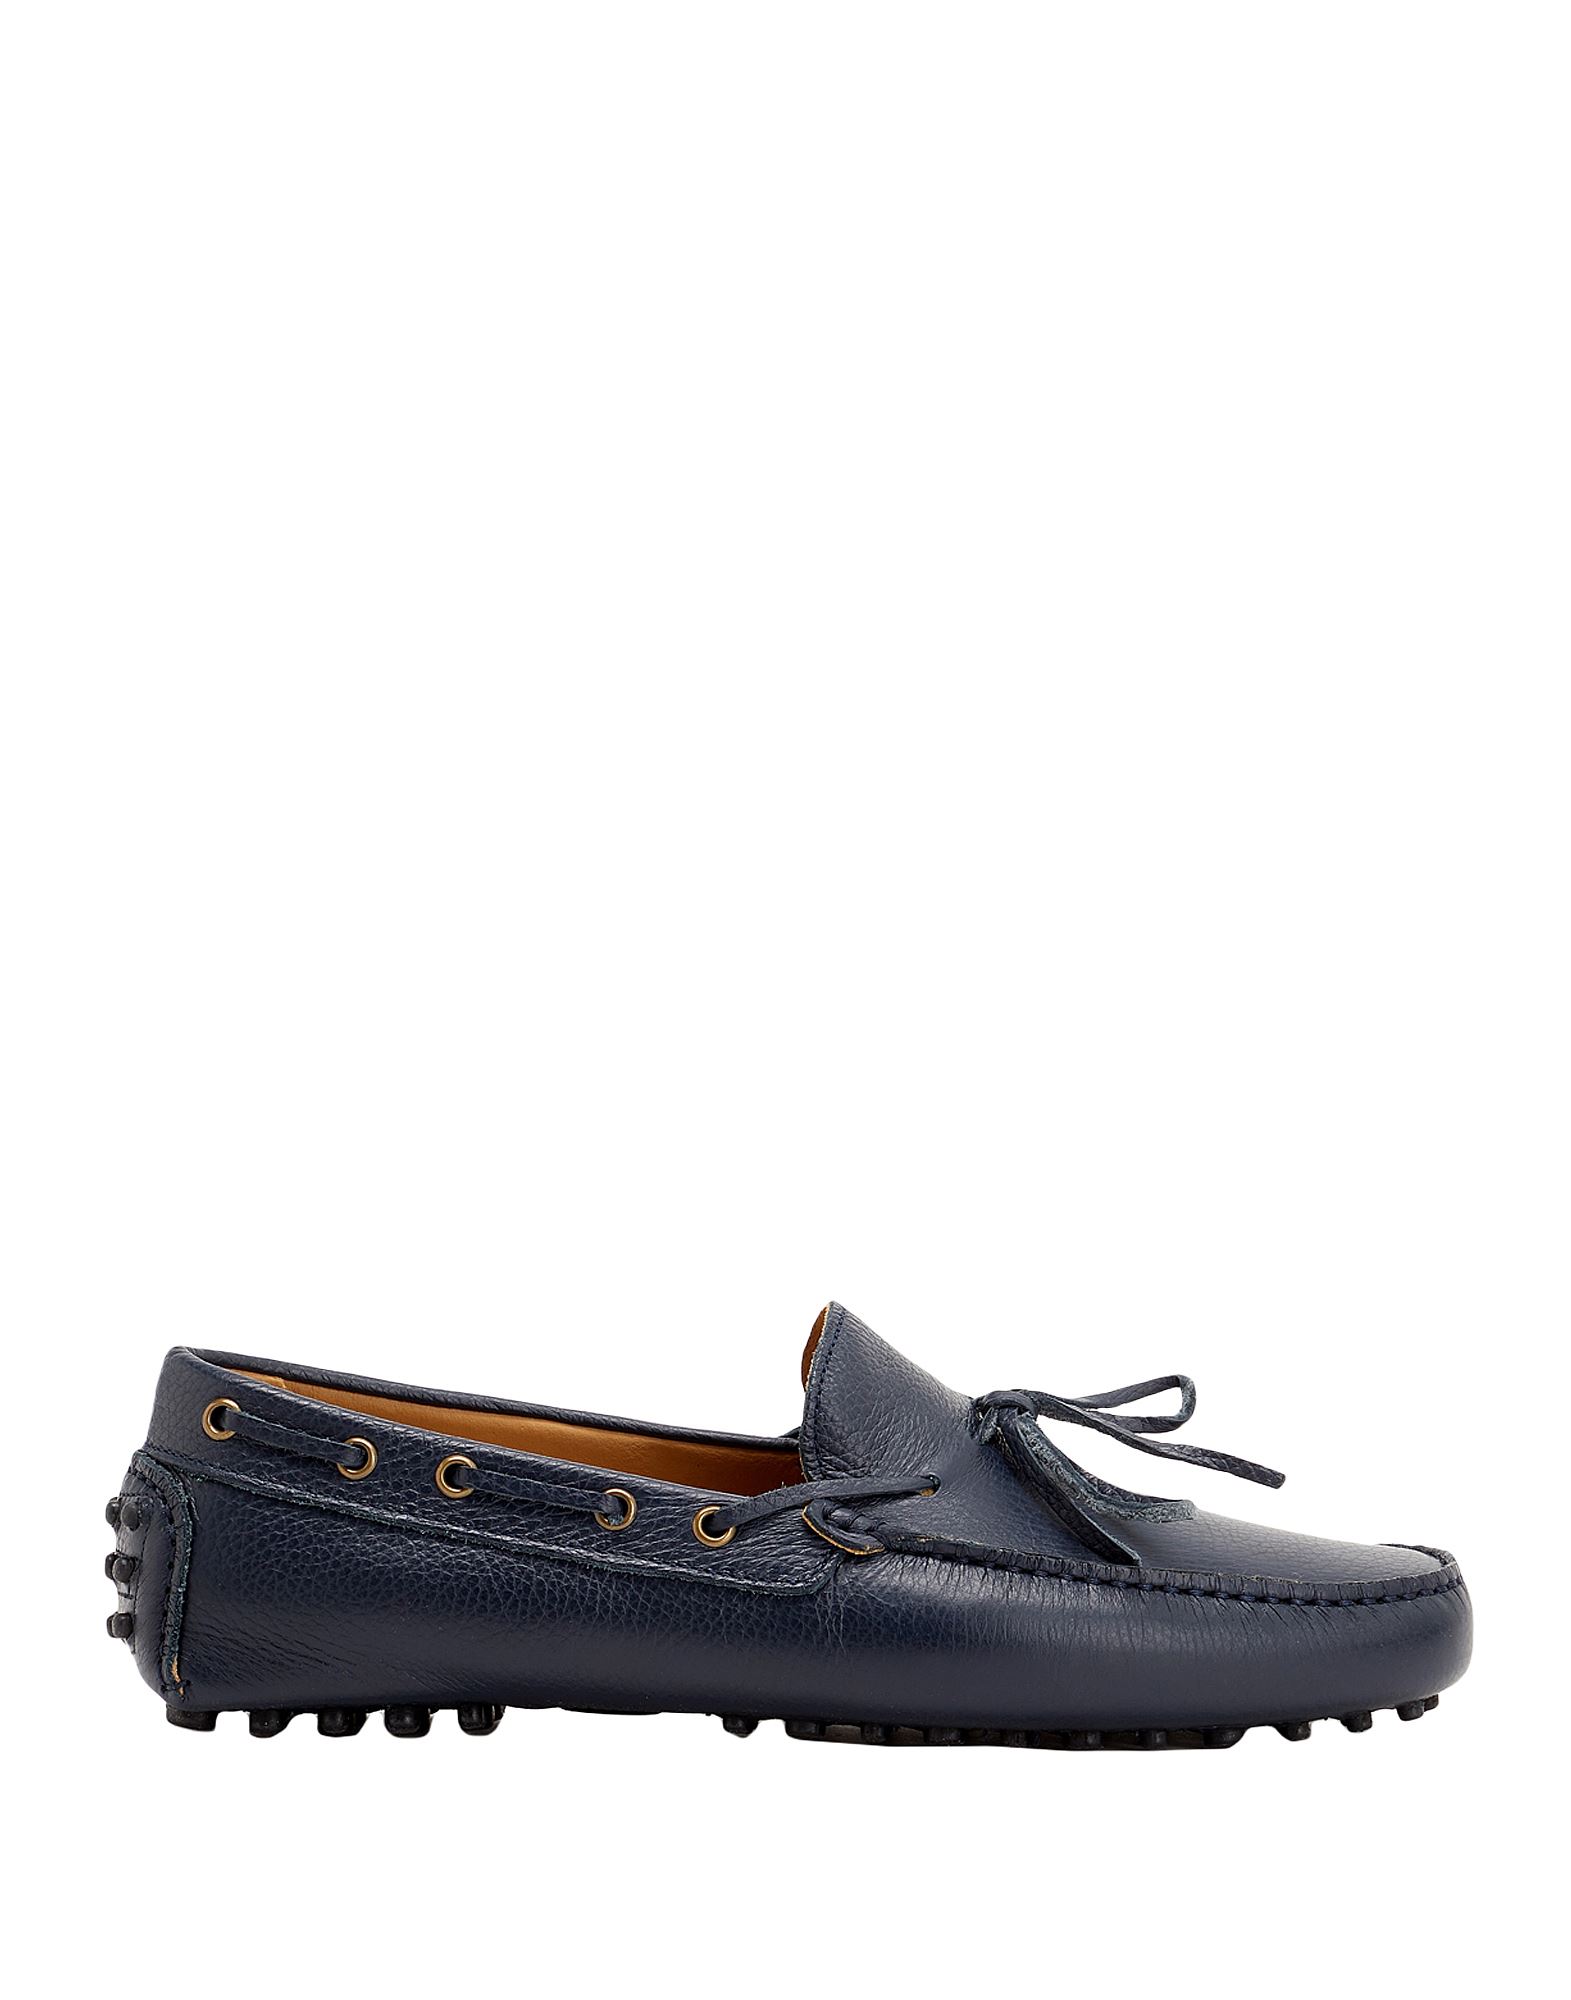 8 By Yoox Loafers In Navy Blue